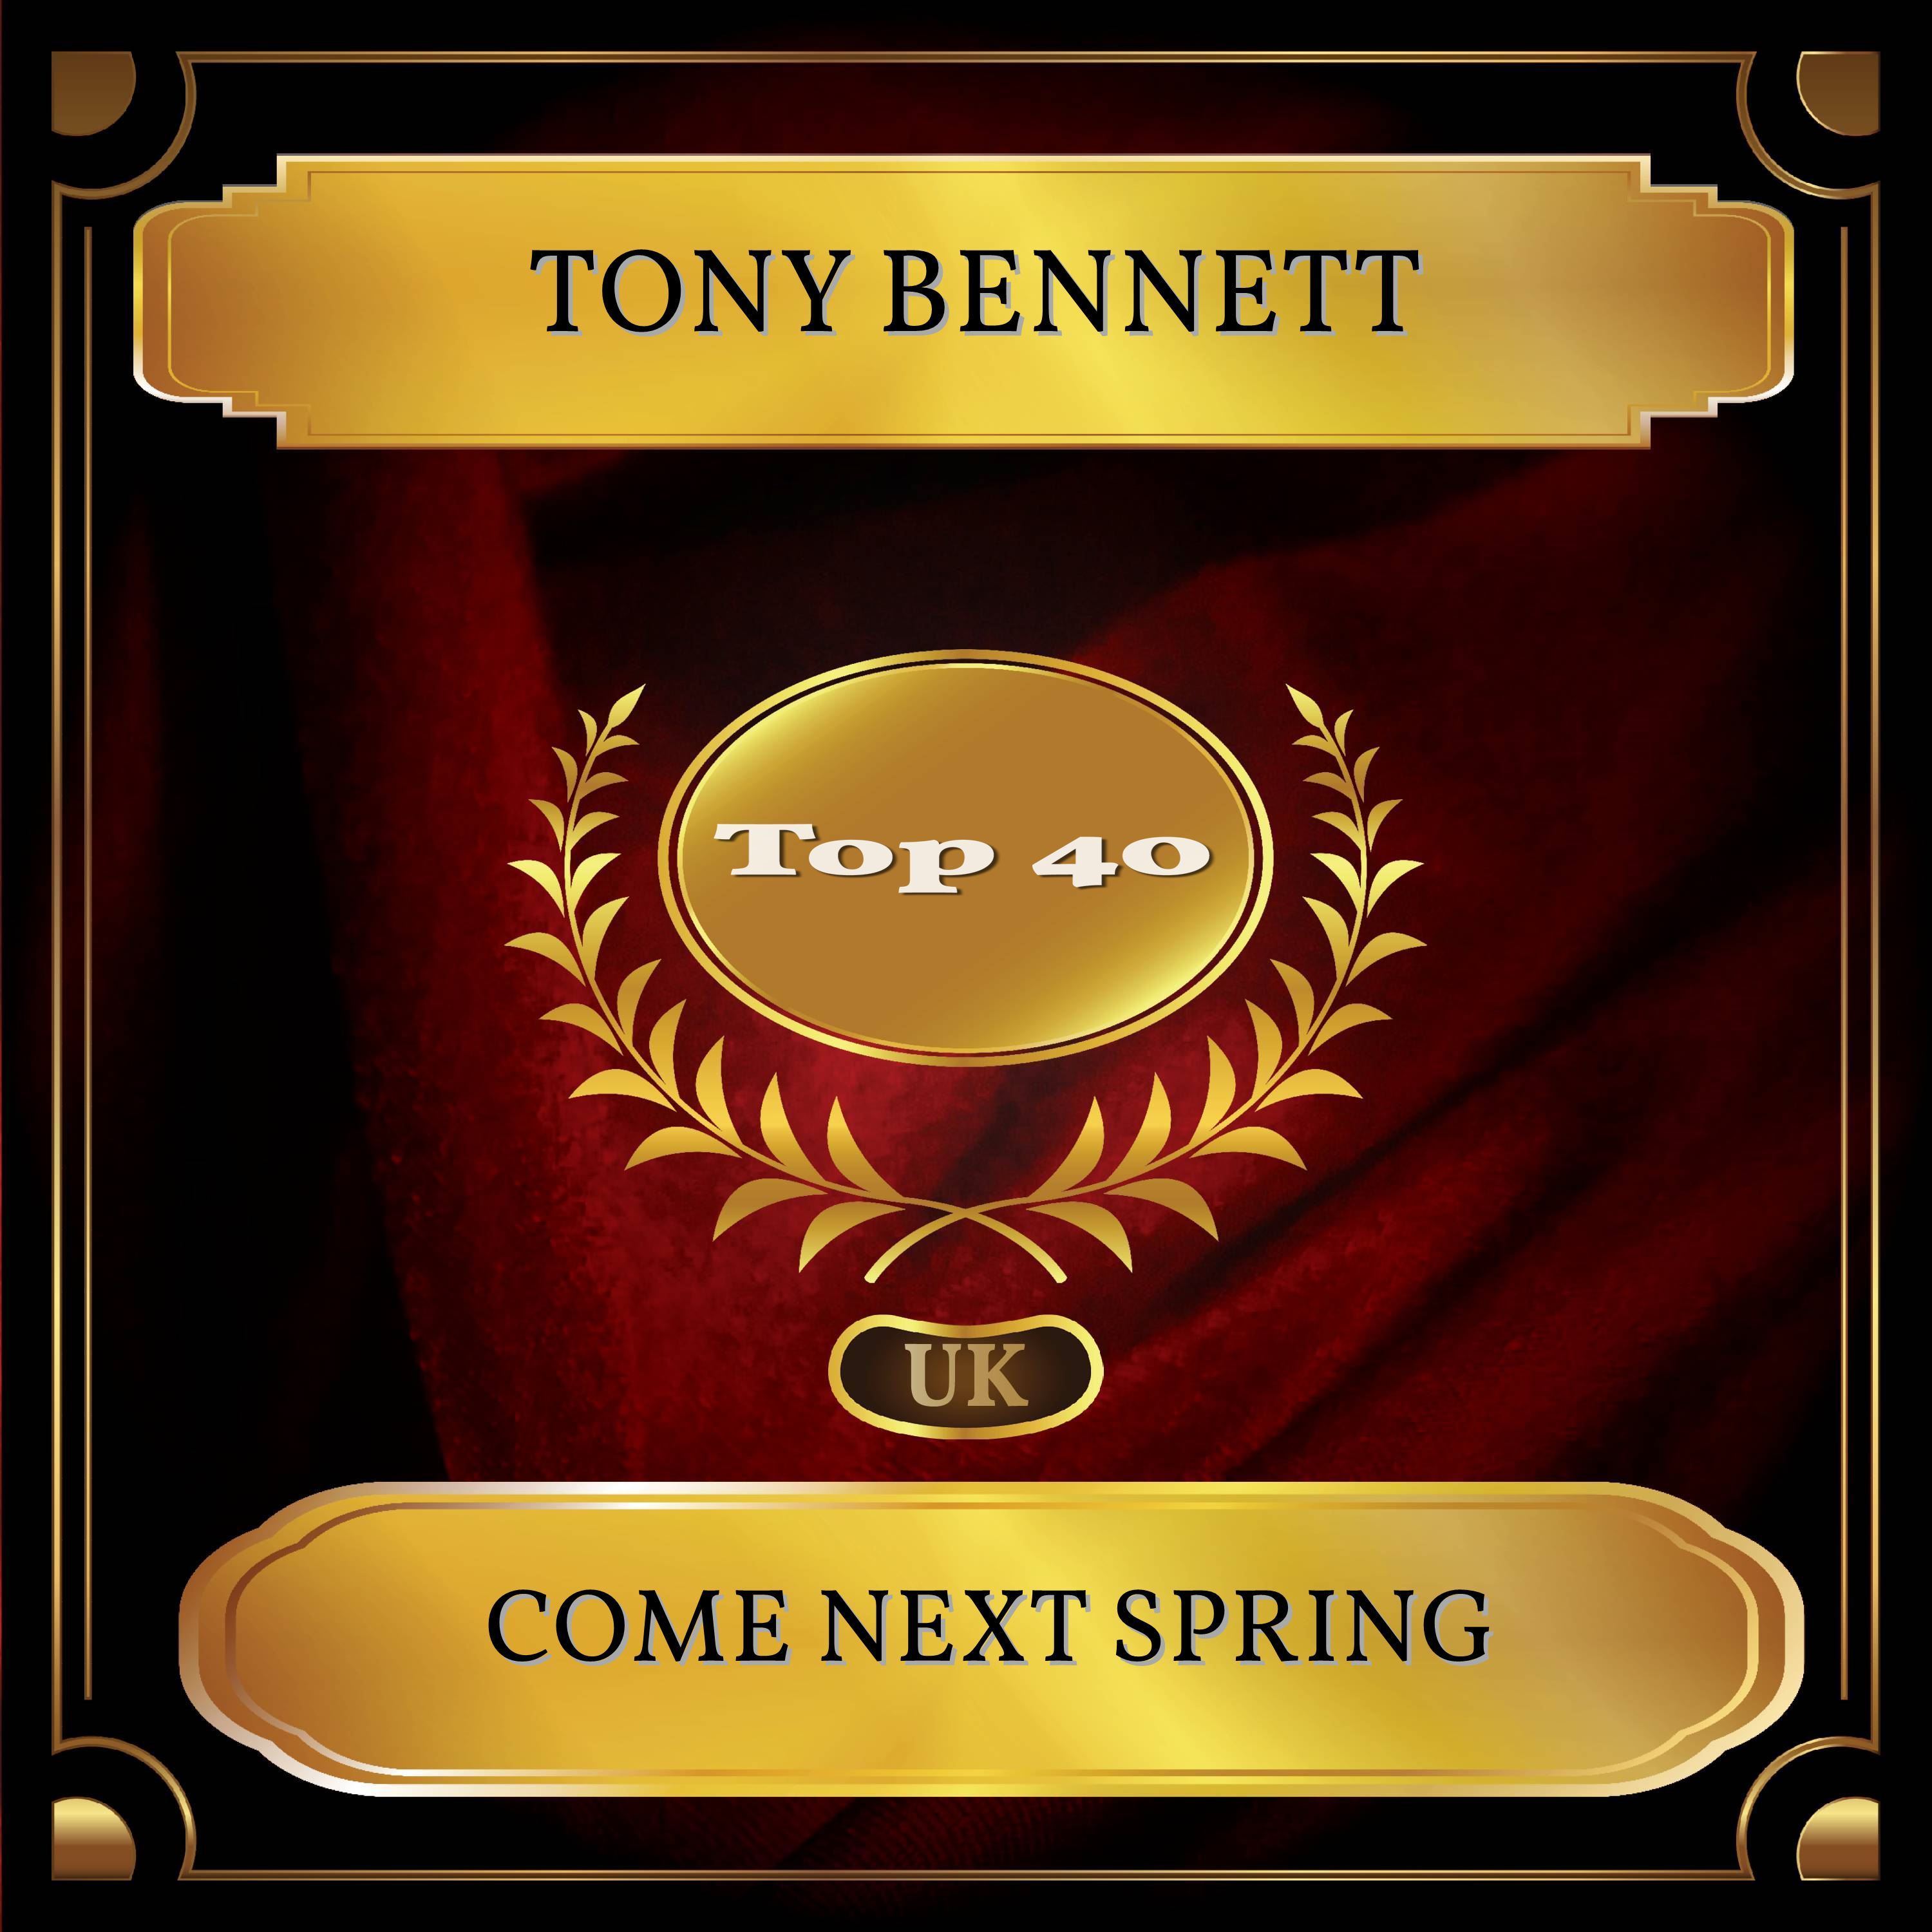 Come Next Spring (UK Chart Top 40 - No. 29)